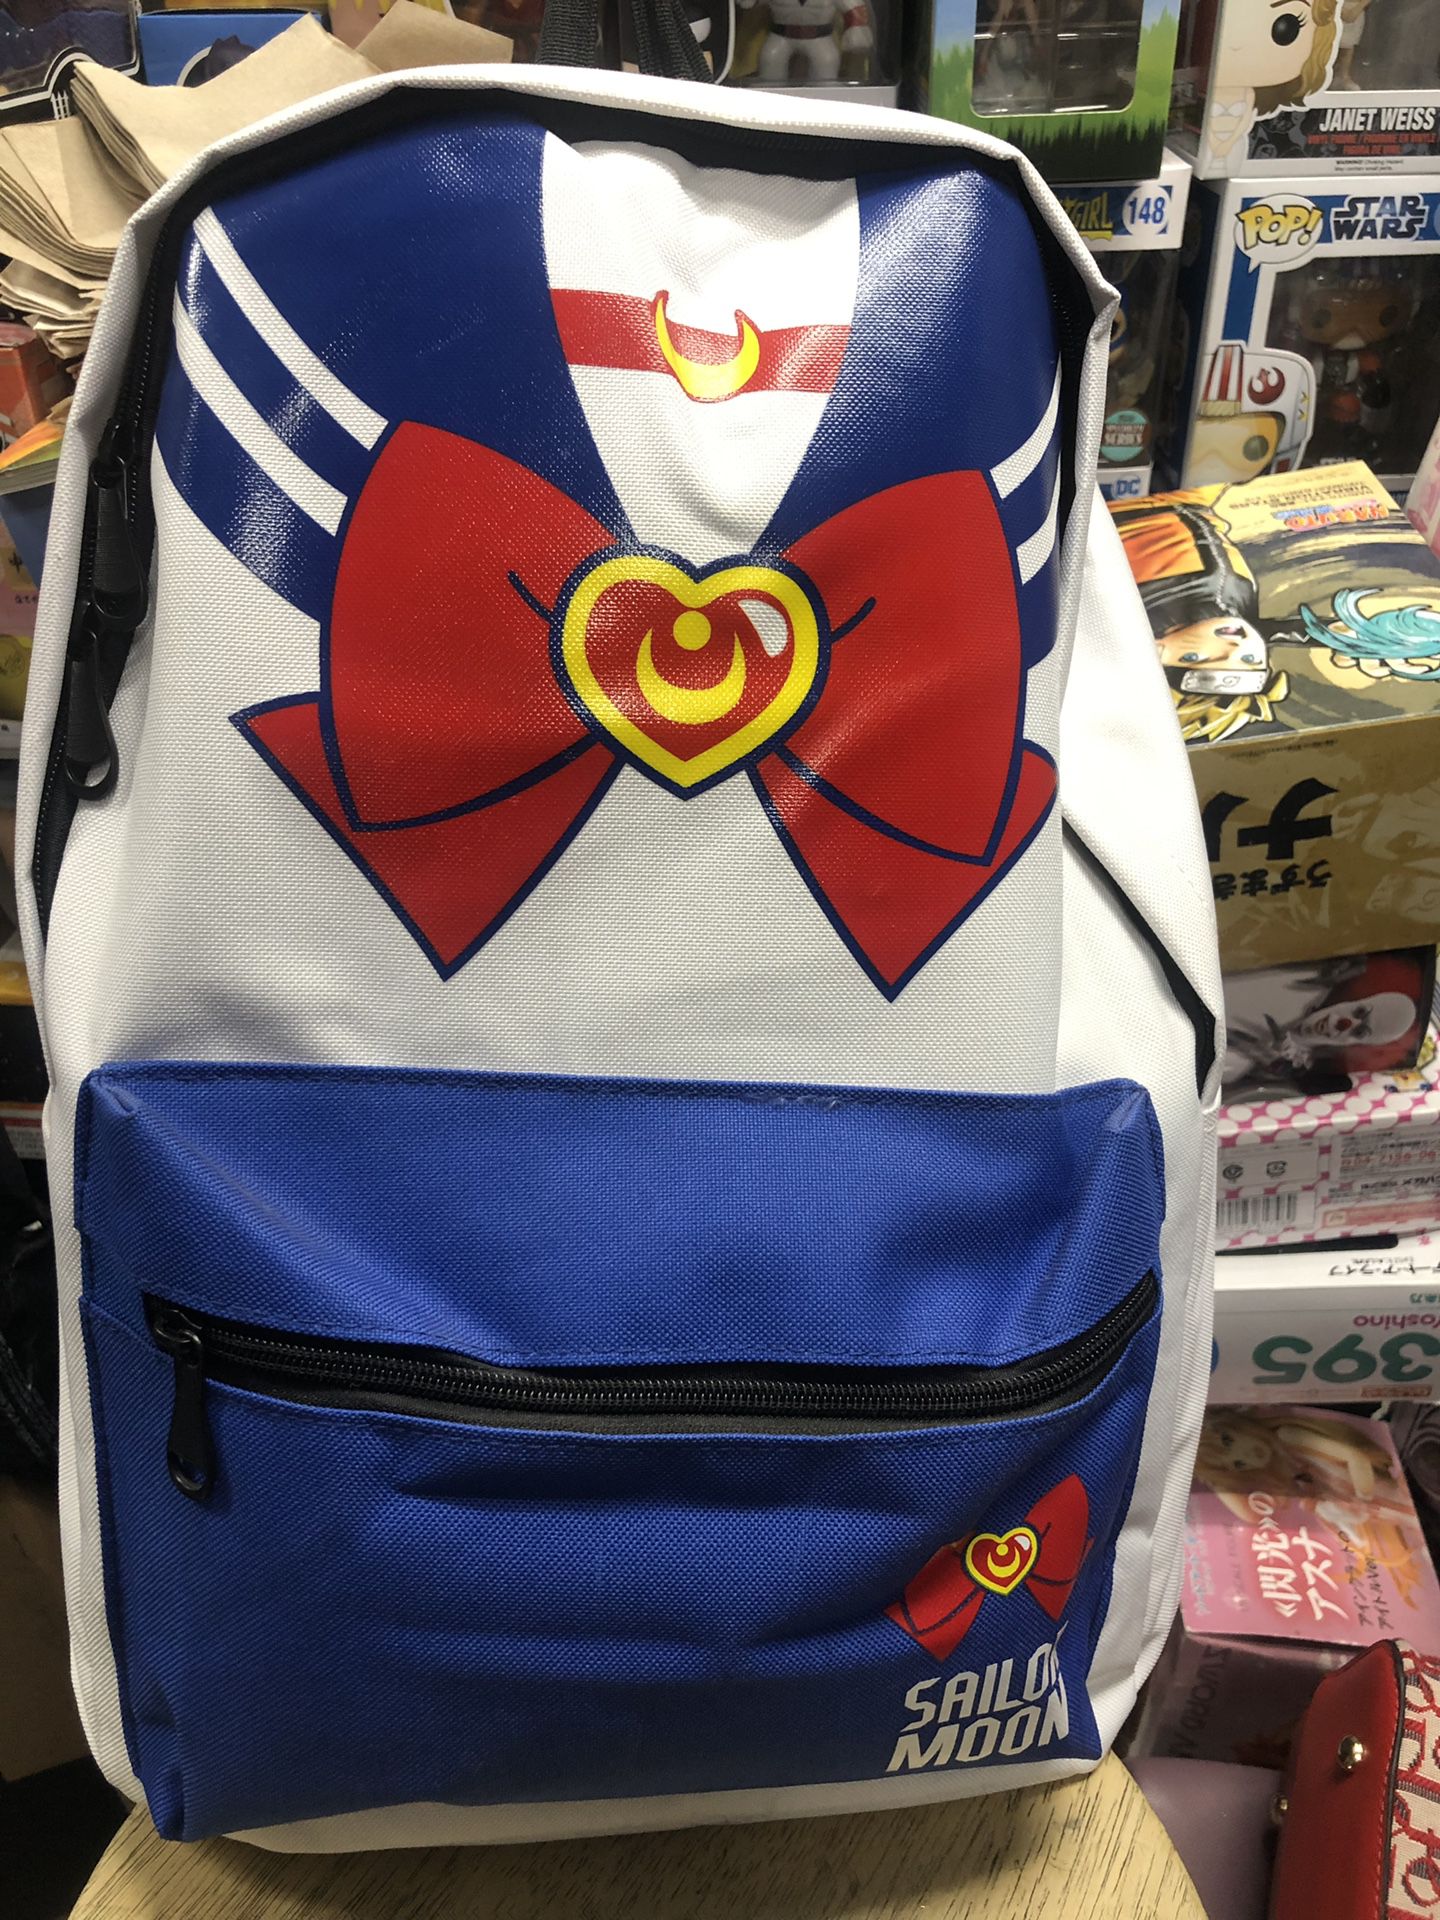 Sailor moon backpack large size